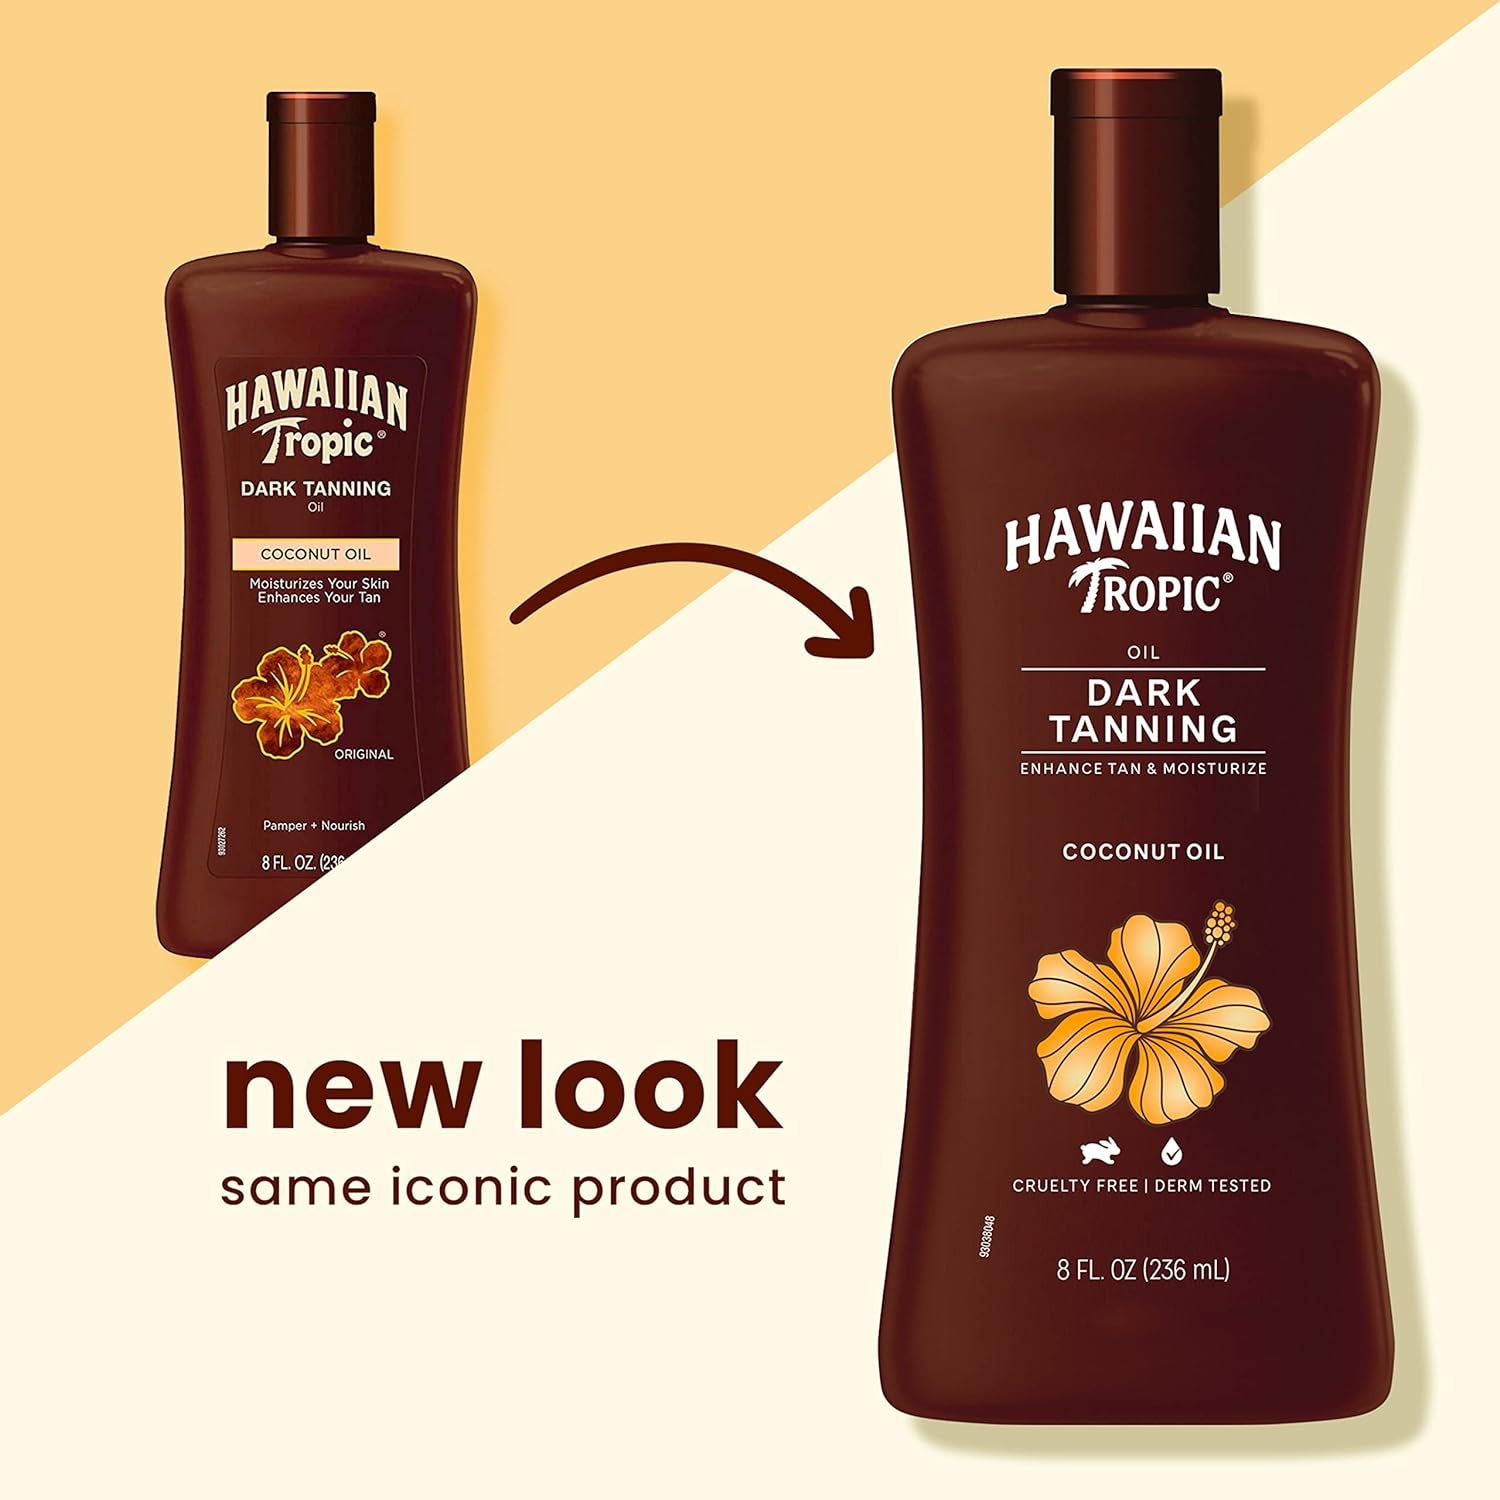 "Sun-Kissed Glow Twin Pack: Hawaiian Tropic Dark Tanning Oil with Cocoa Butter & Coconut Oil"